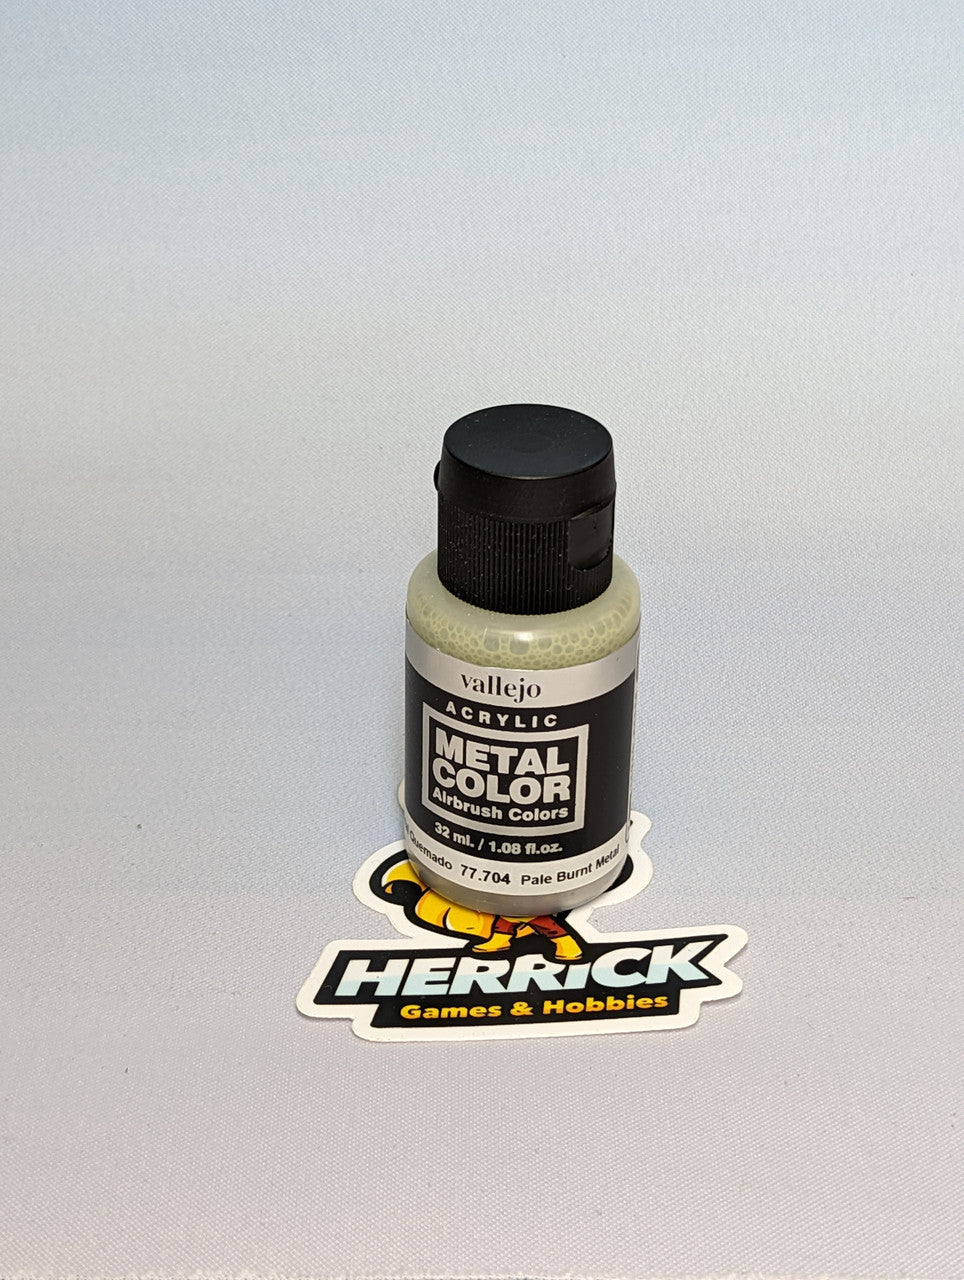 Metal Color 32ml. Modelism paint from Vallejo - Purchase online